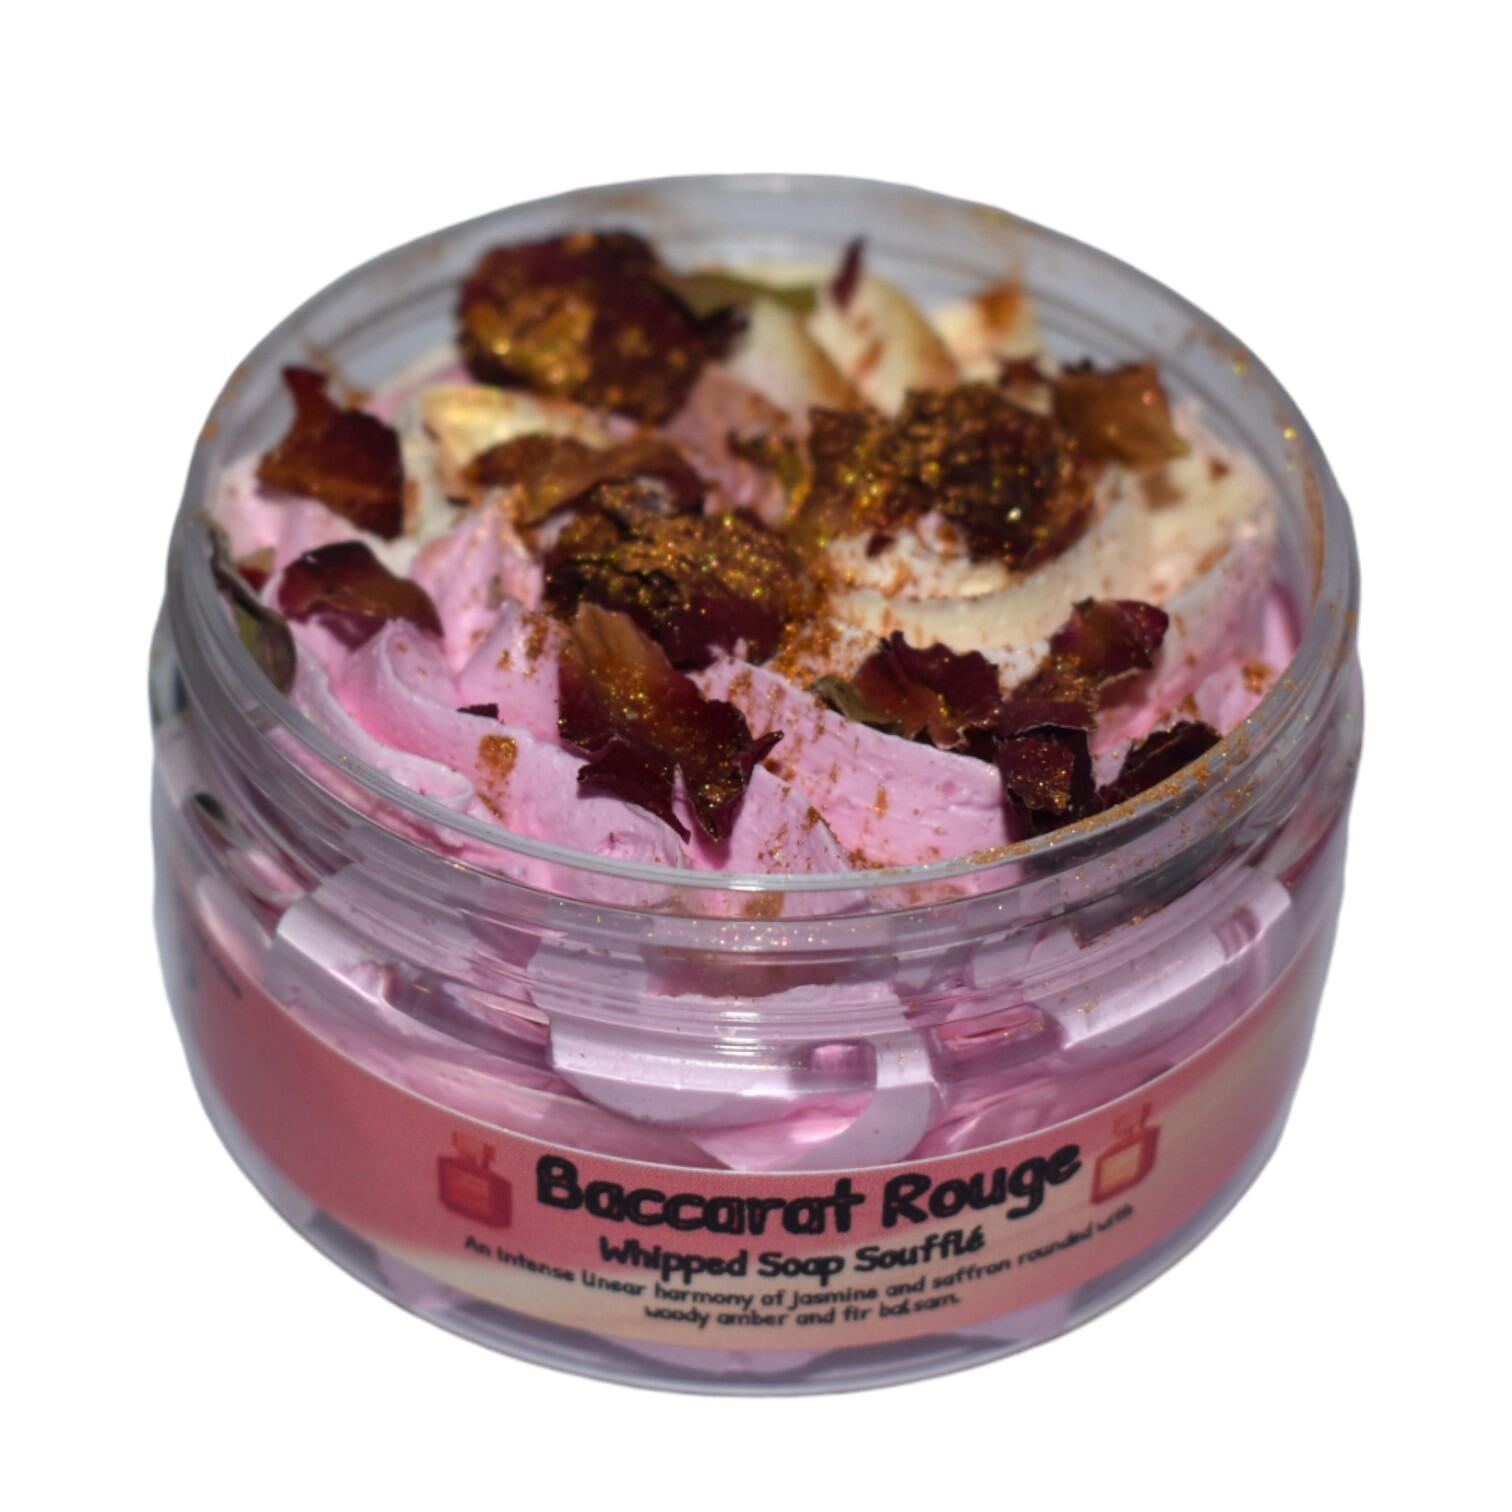 Baccarat Rouge Whipped Soap Soufflé